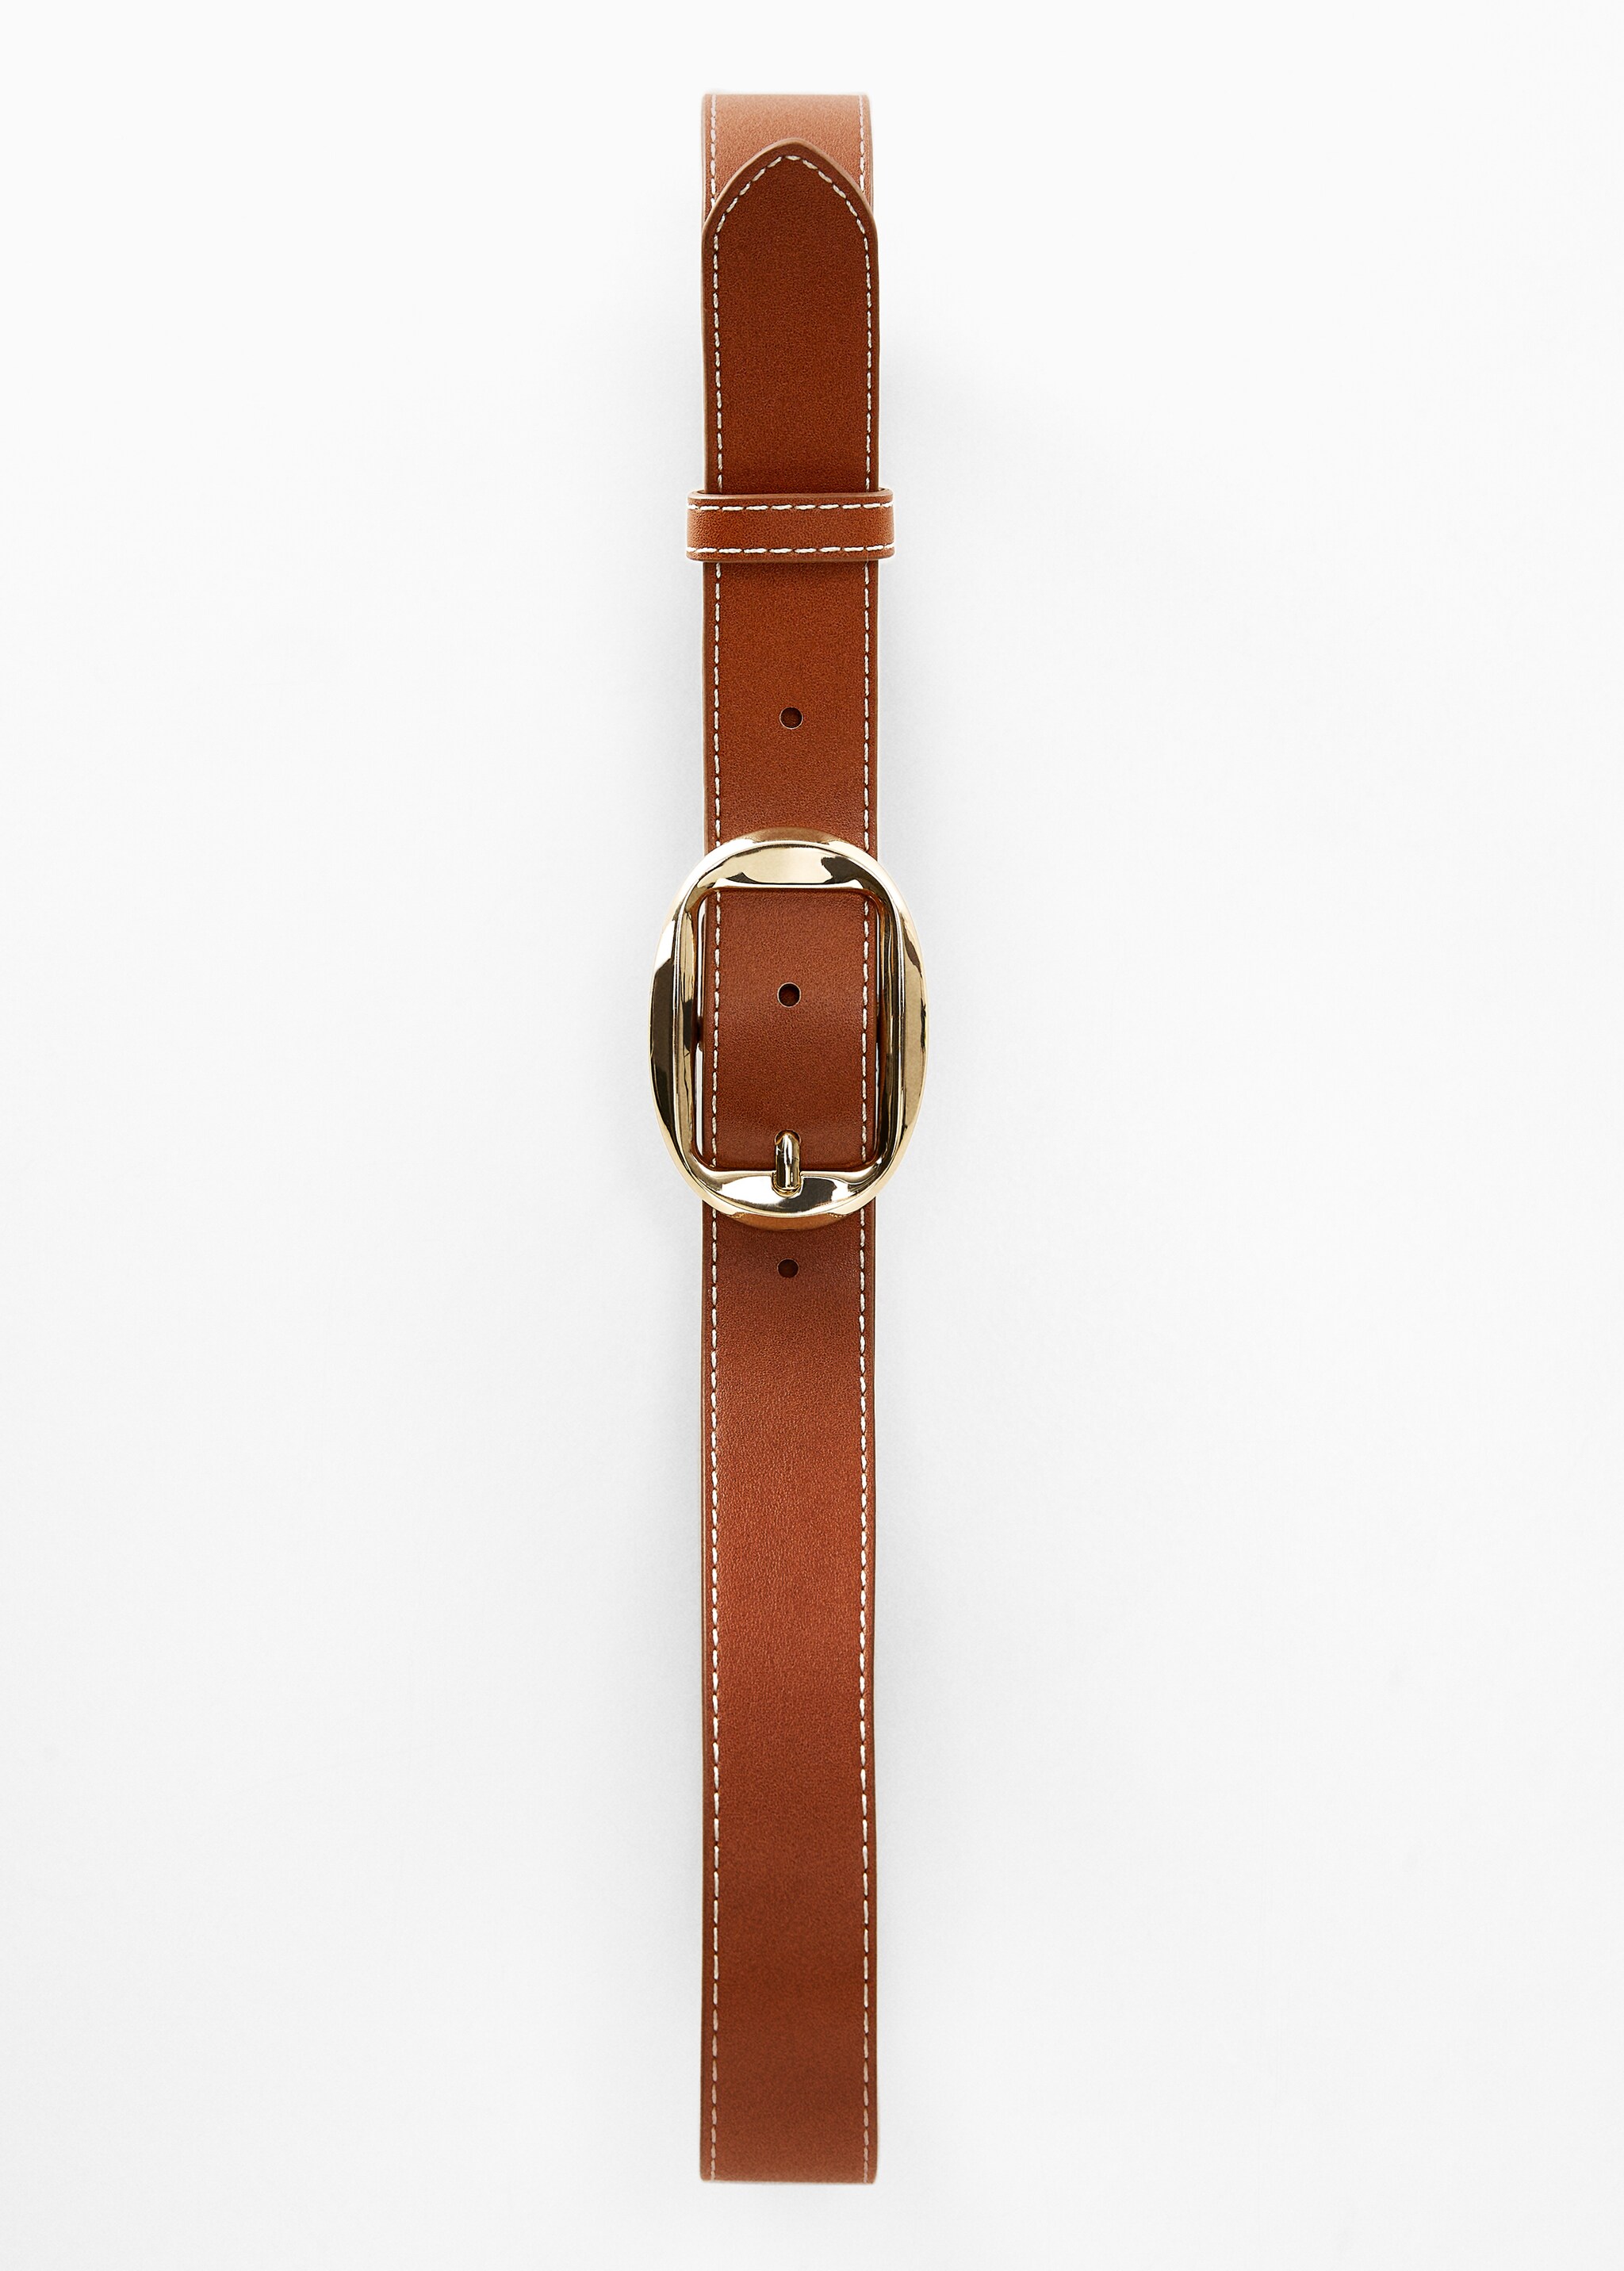 Oval buckle belt - Details of the article 5